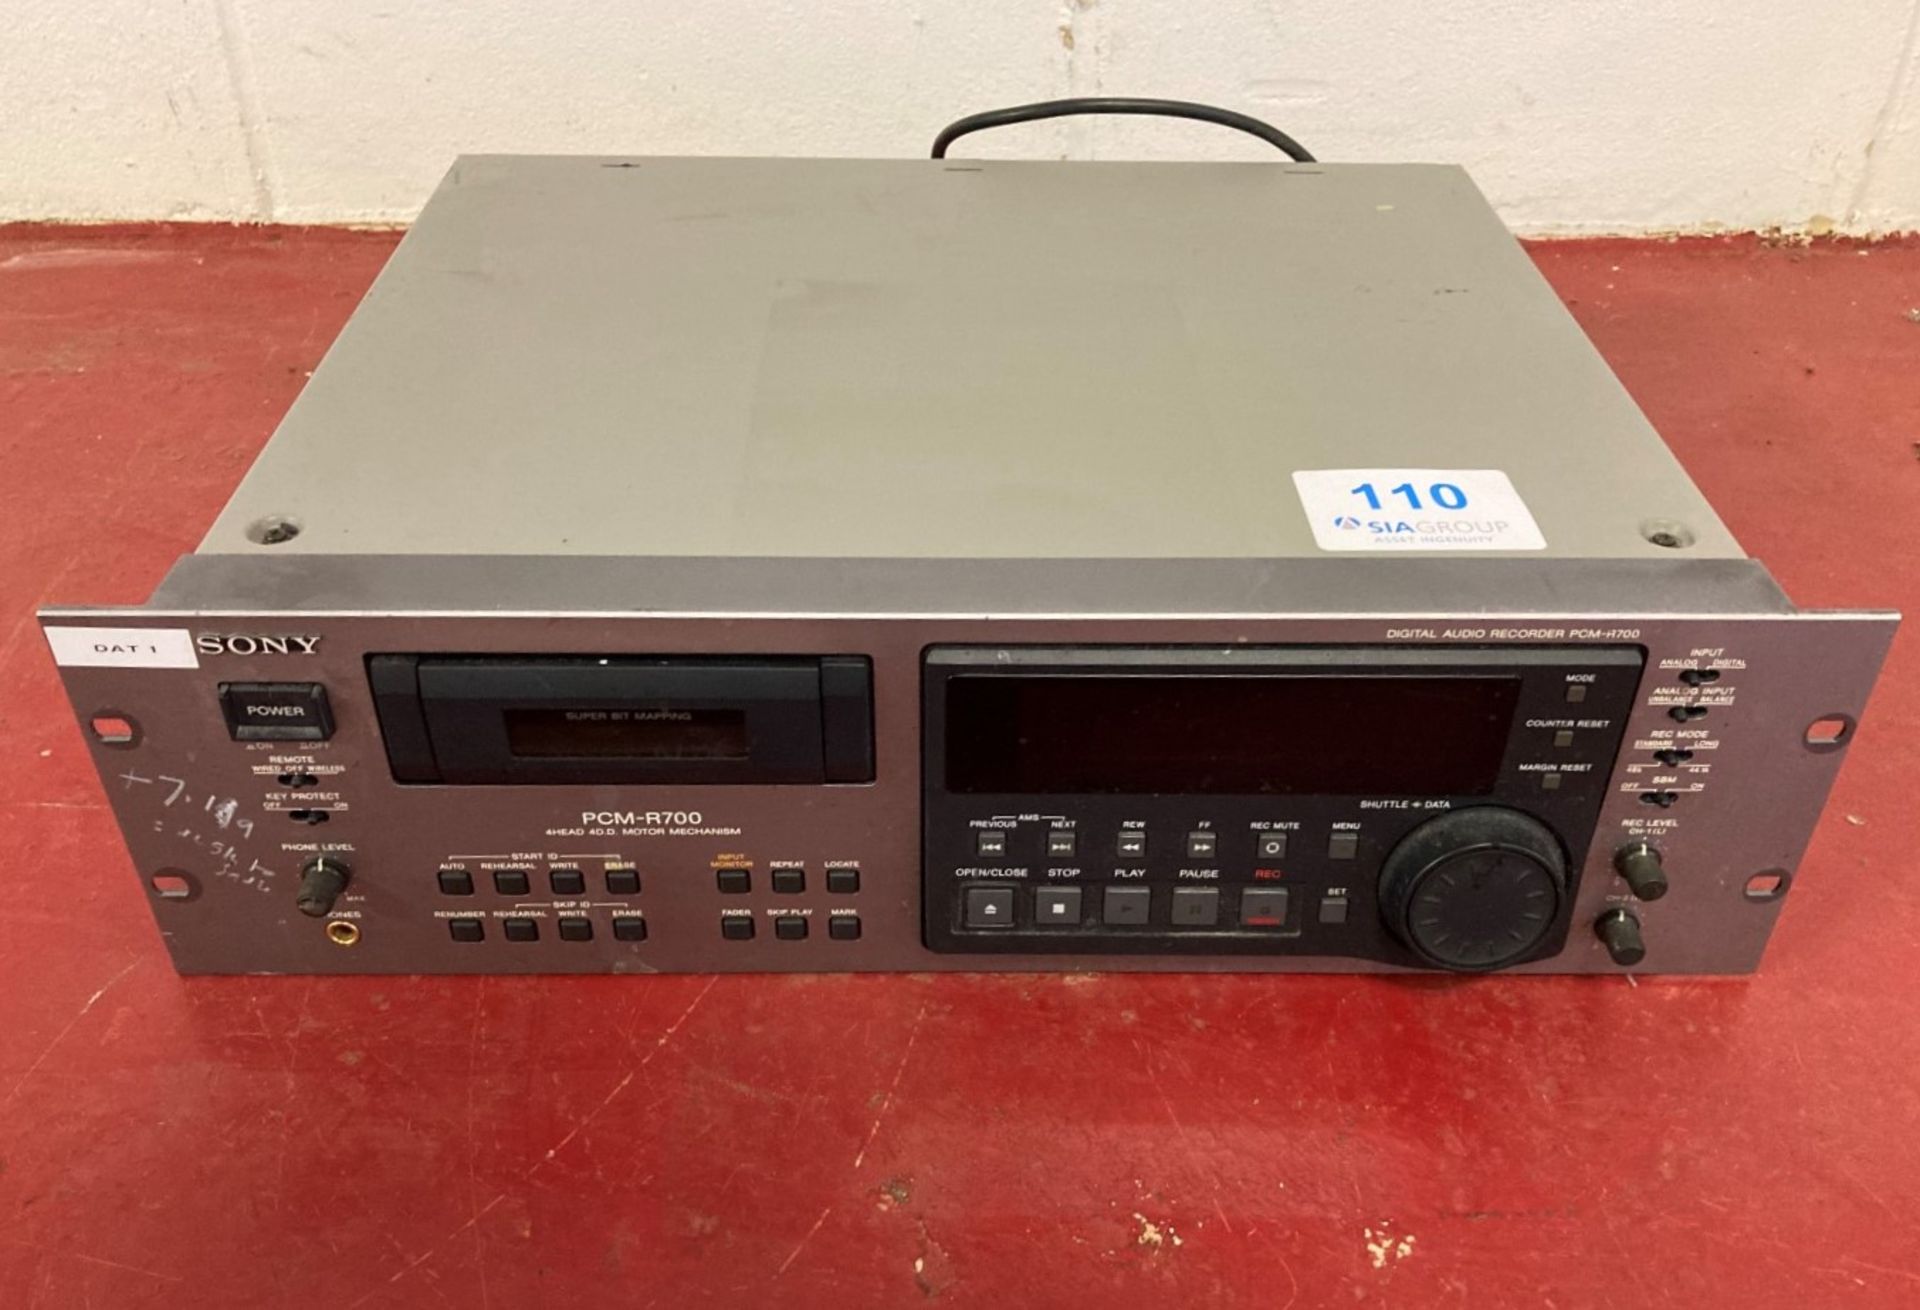 Sony PCM-R700 professional DAT recorder